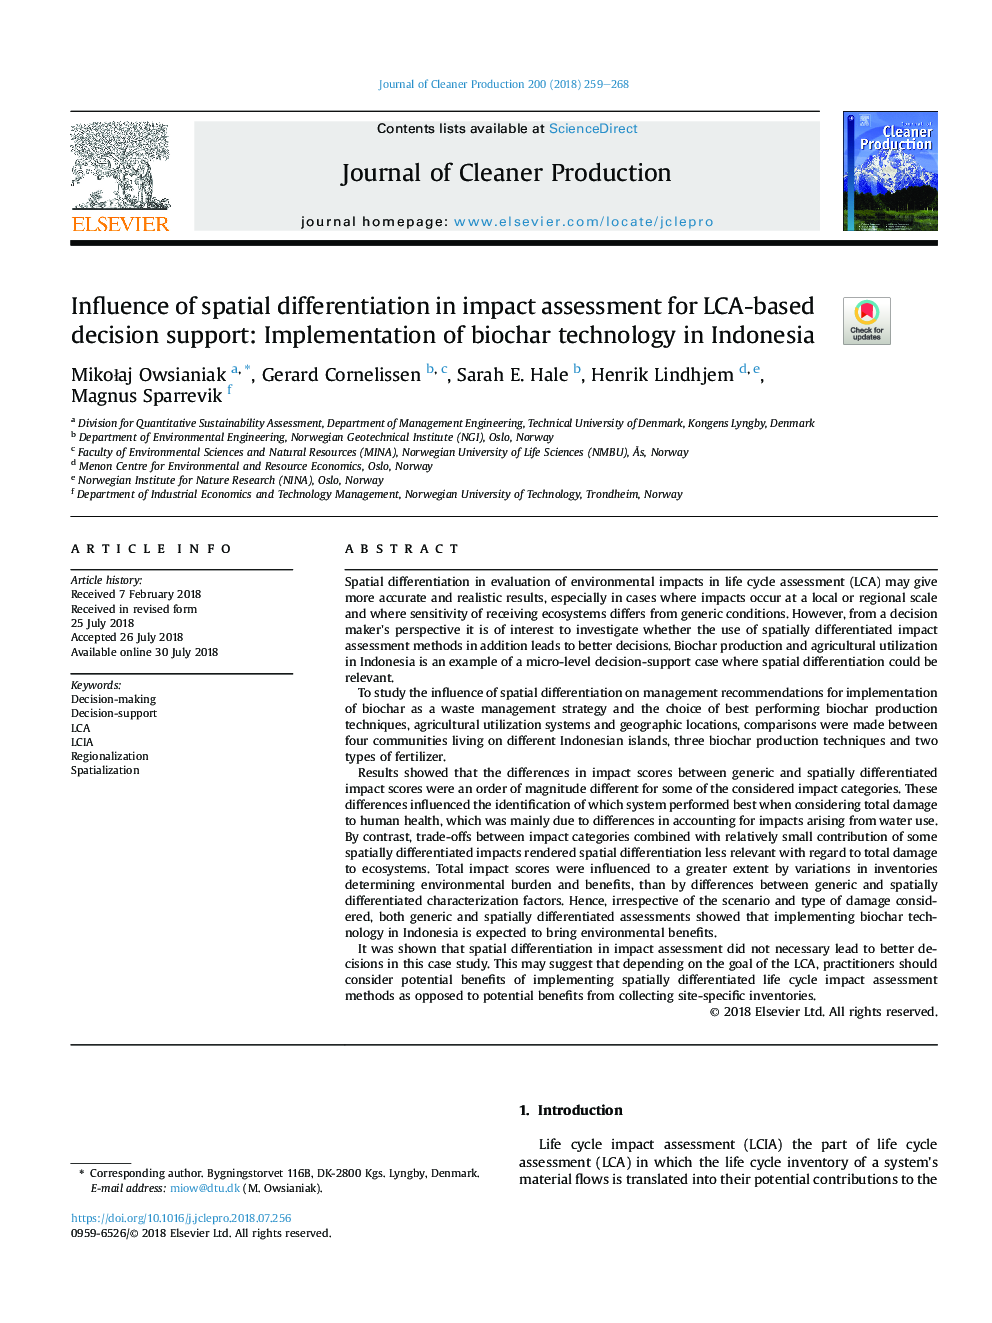 Influence of spatial differentiation in impact assessment for LCA-based decision support: Implementation of biochar technology in Indonesia